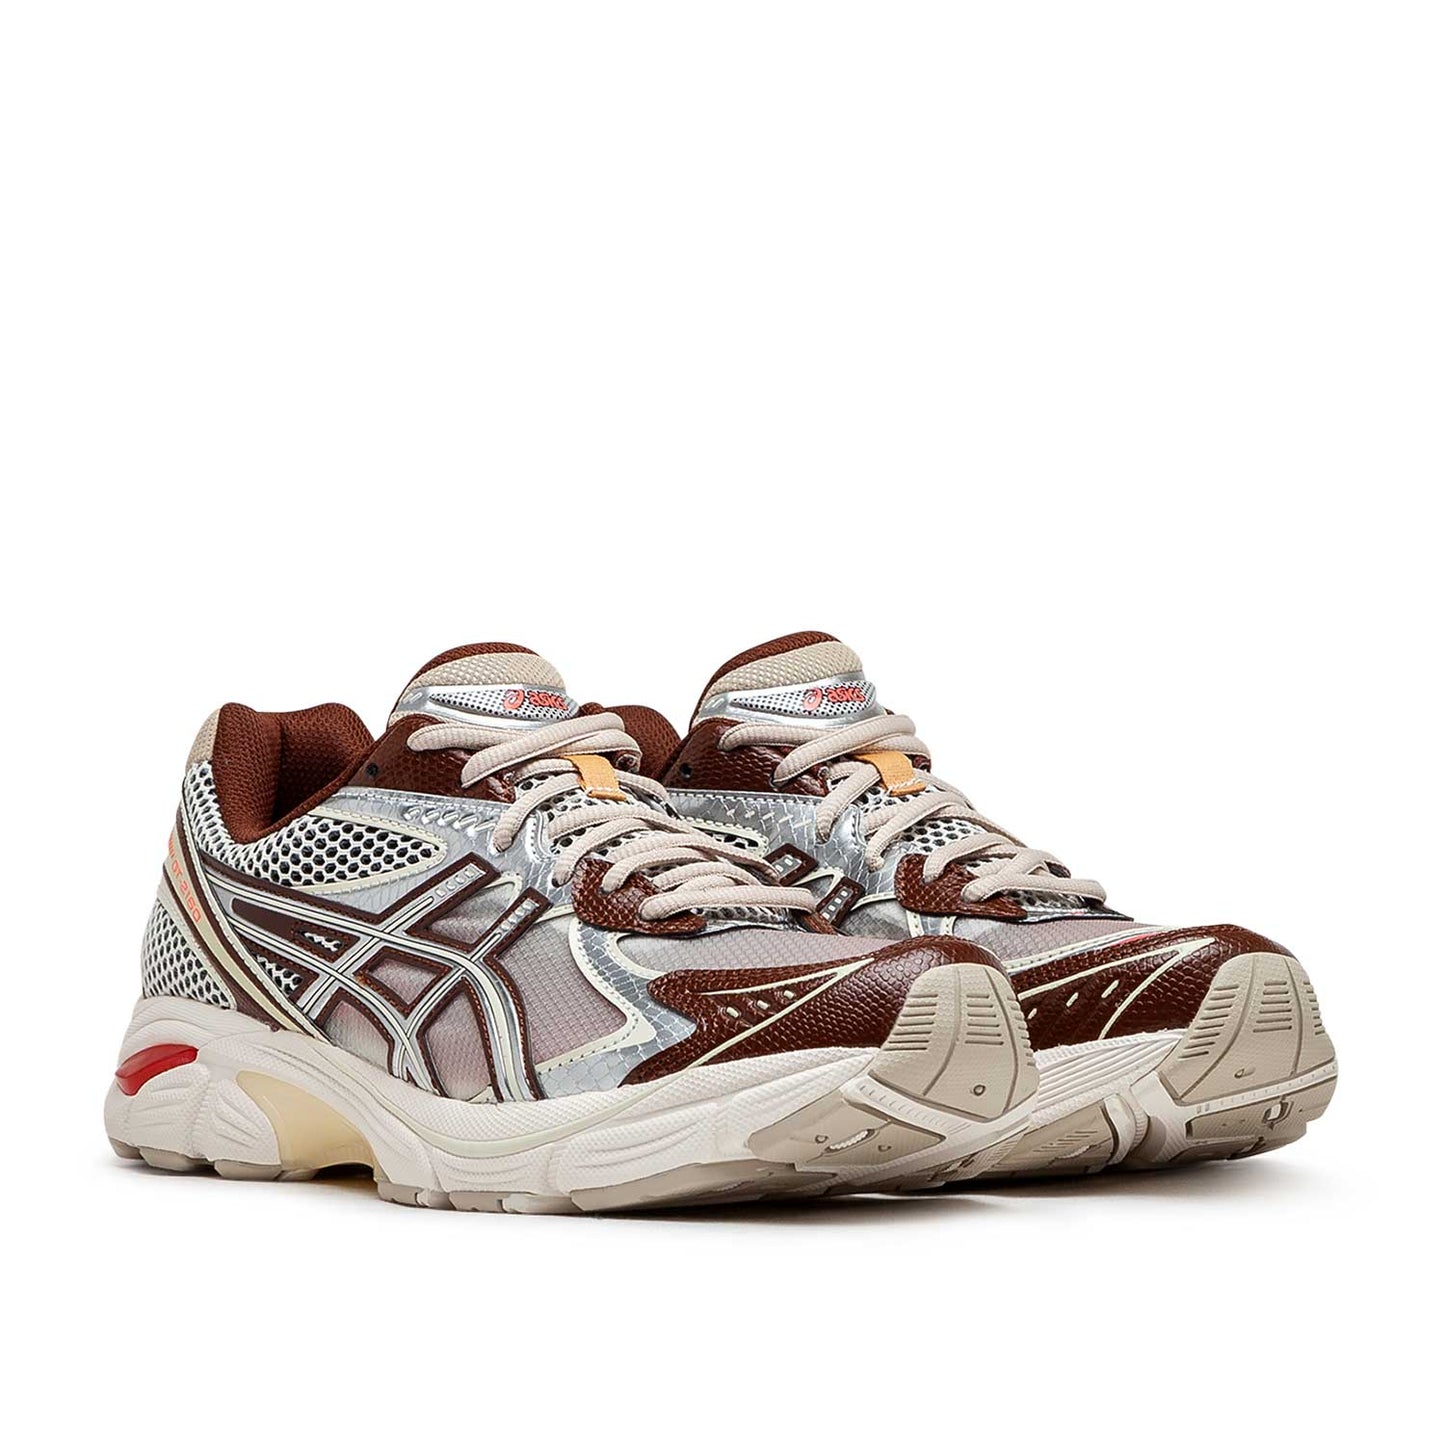 Asics x ABOVE THE CLOUDS  GT-2160 (Braun / Silber)  - Allike Store